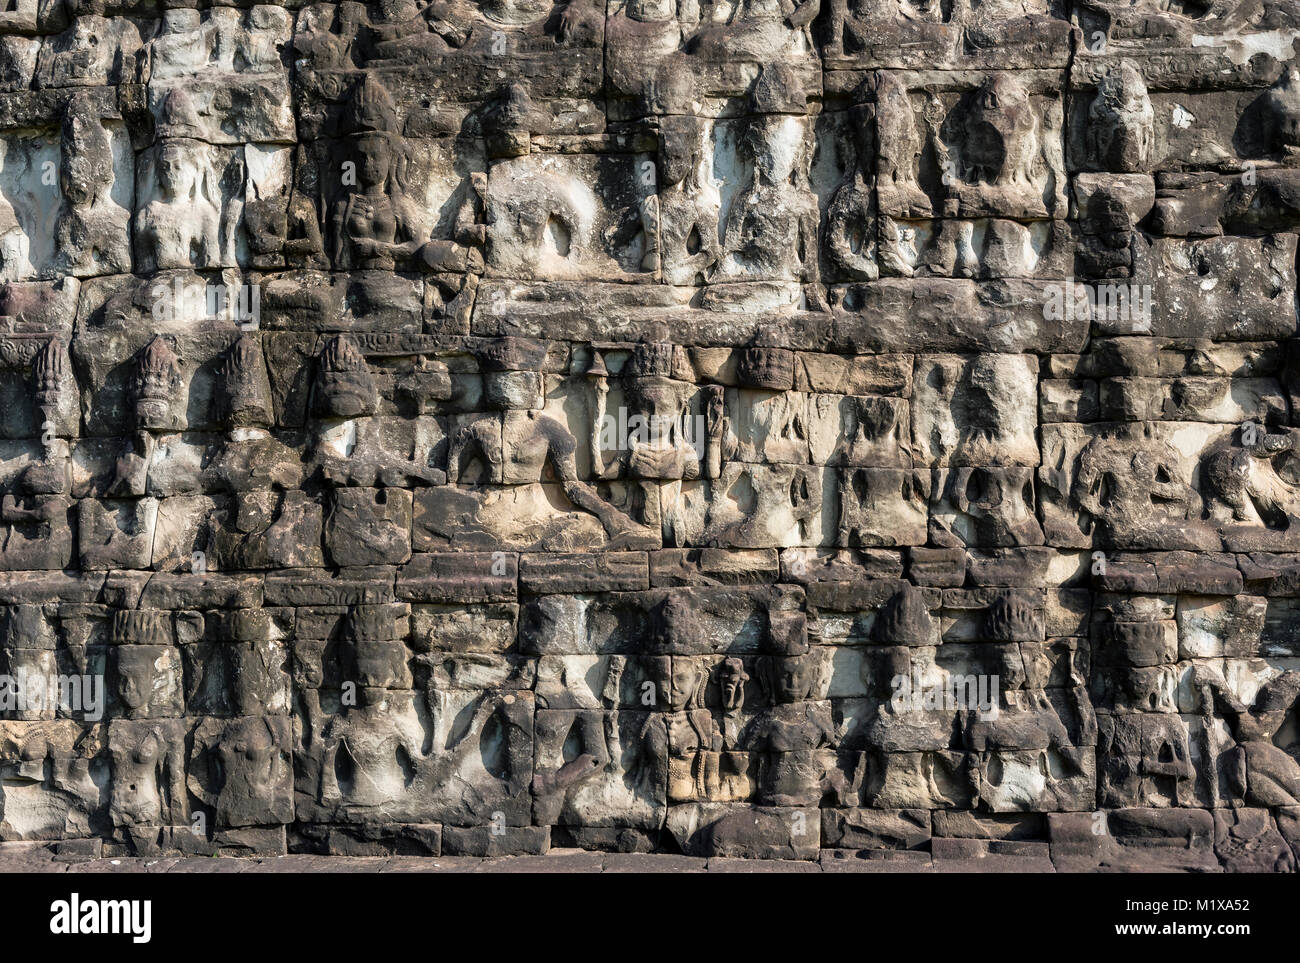 Carvings on the base of Terrace of the Leper King, Angkor Thom, Cambodia Stock Photo